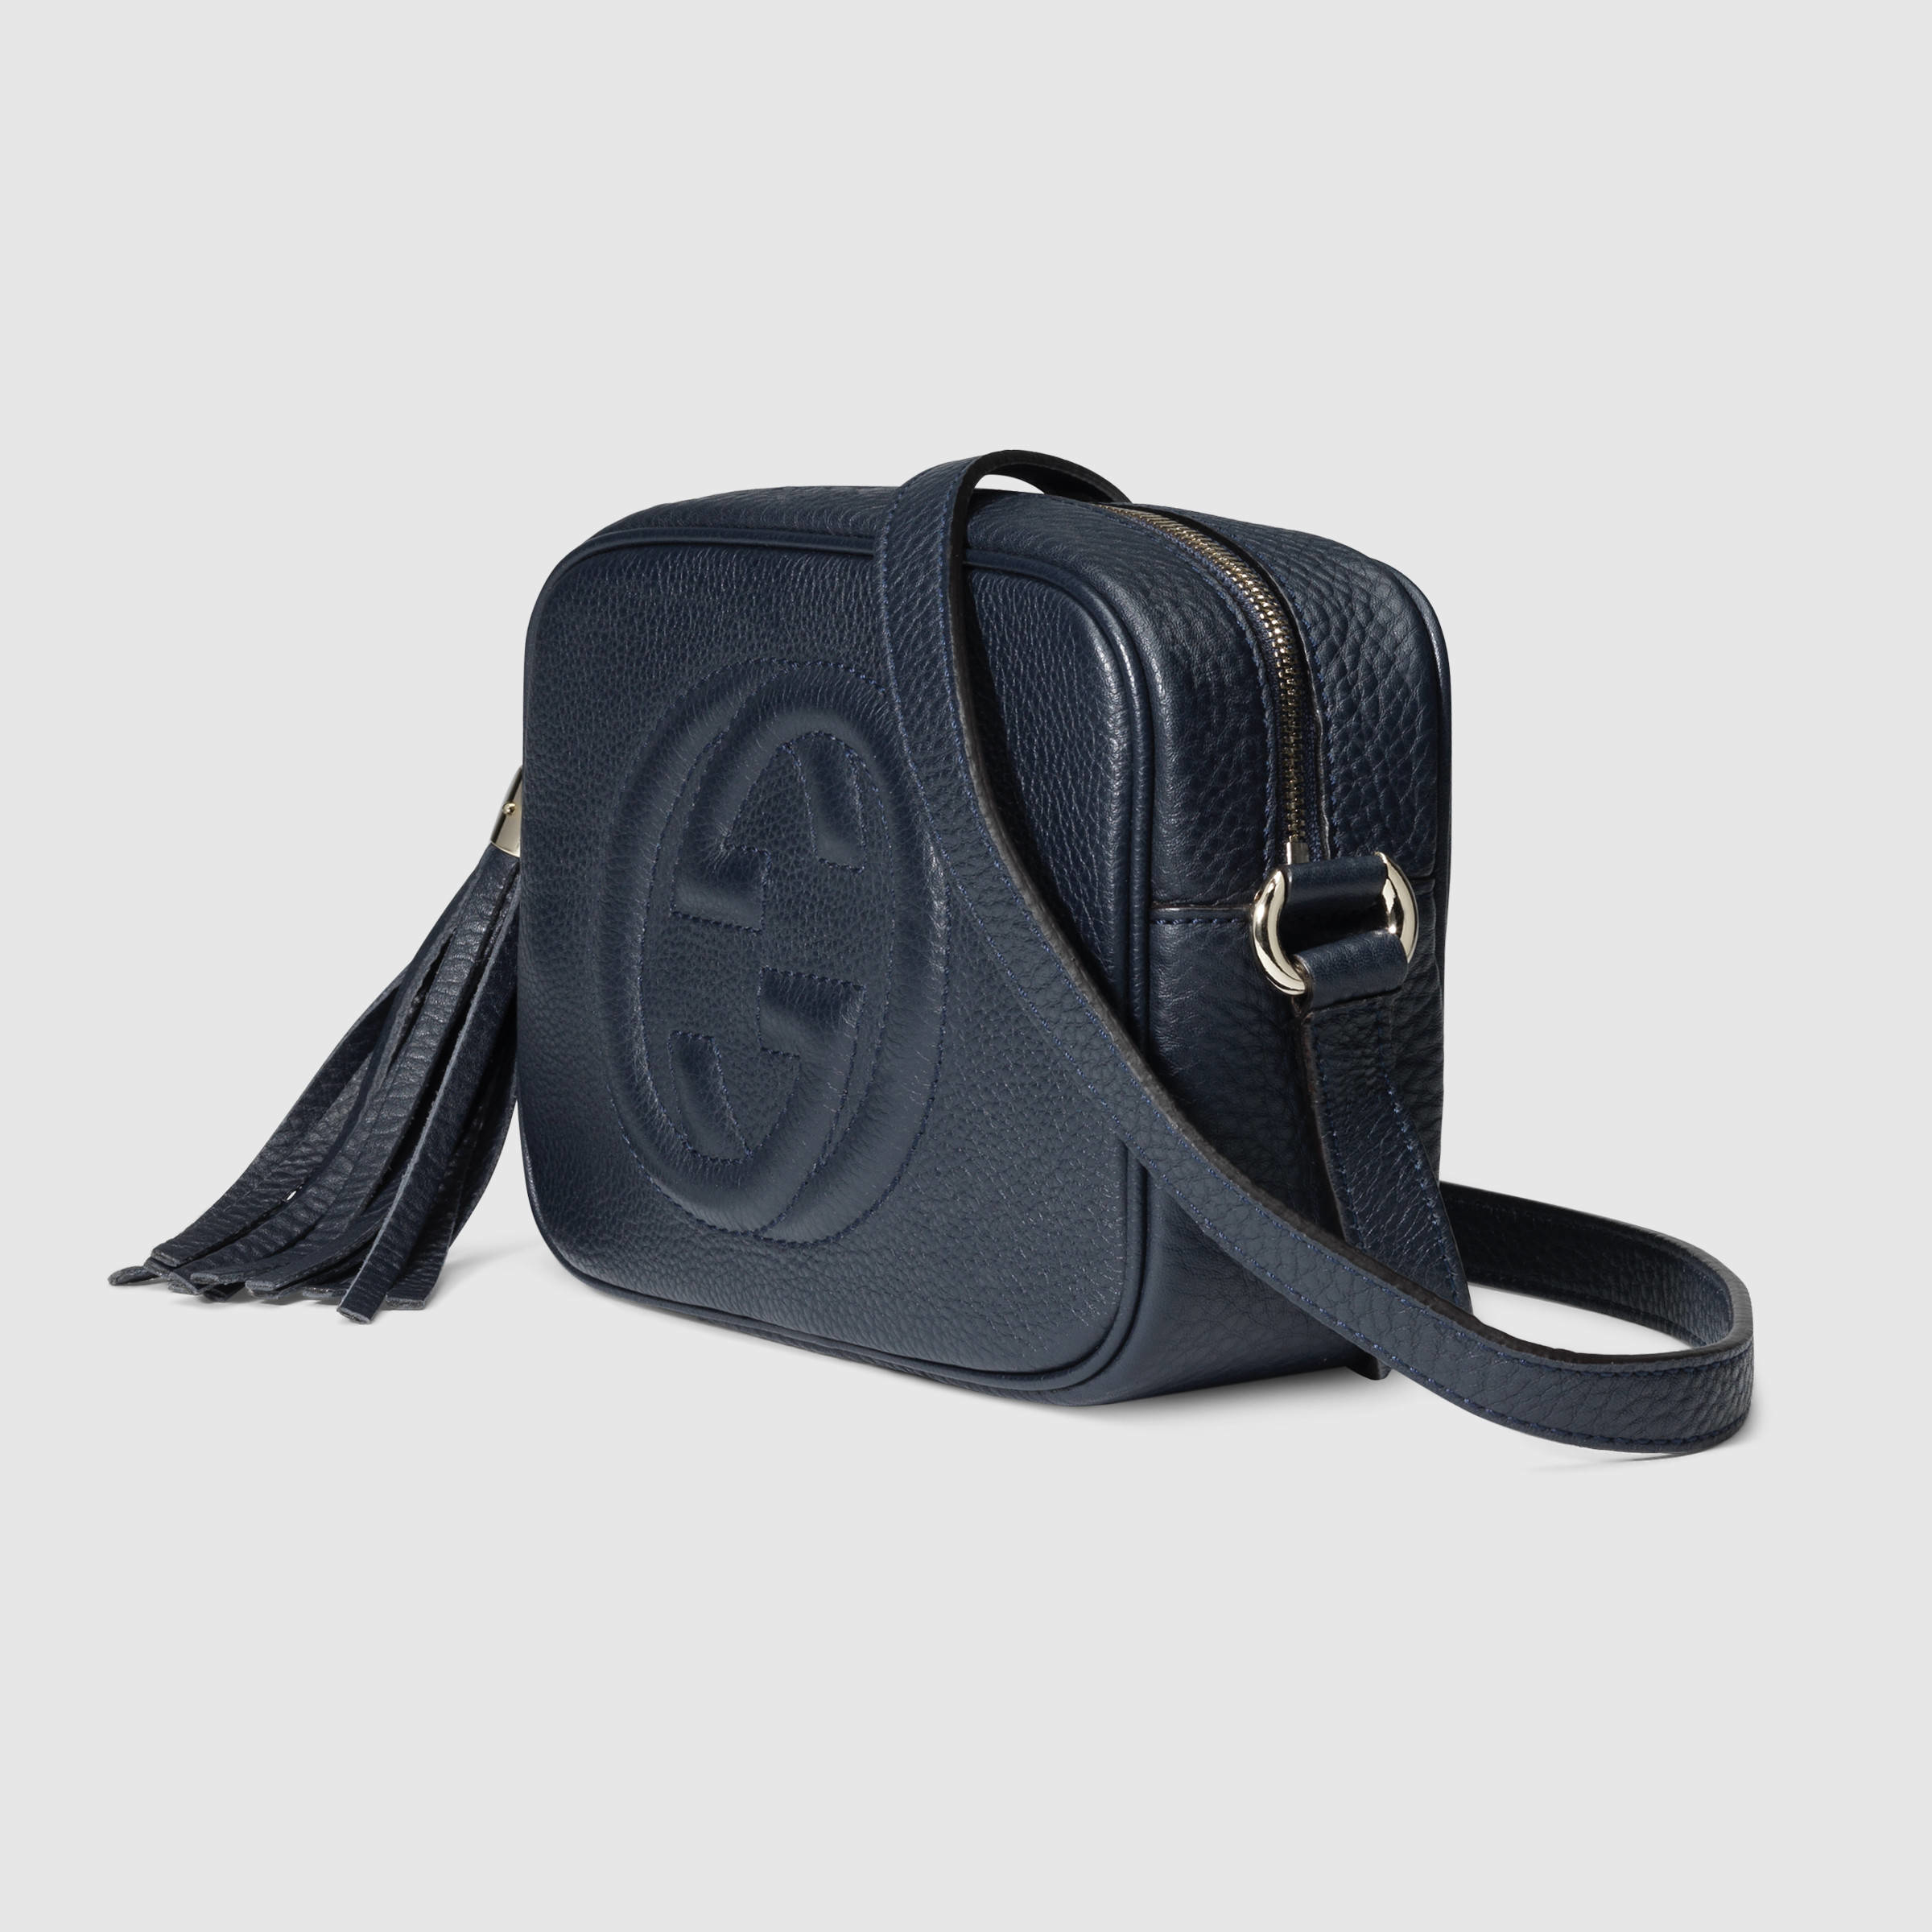 Gucci Soho Leather Disco Bag in Blue (Blue) - Lyst